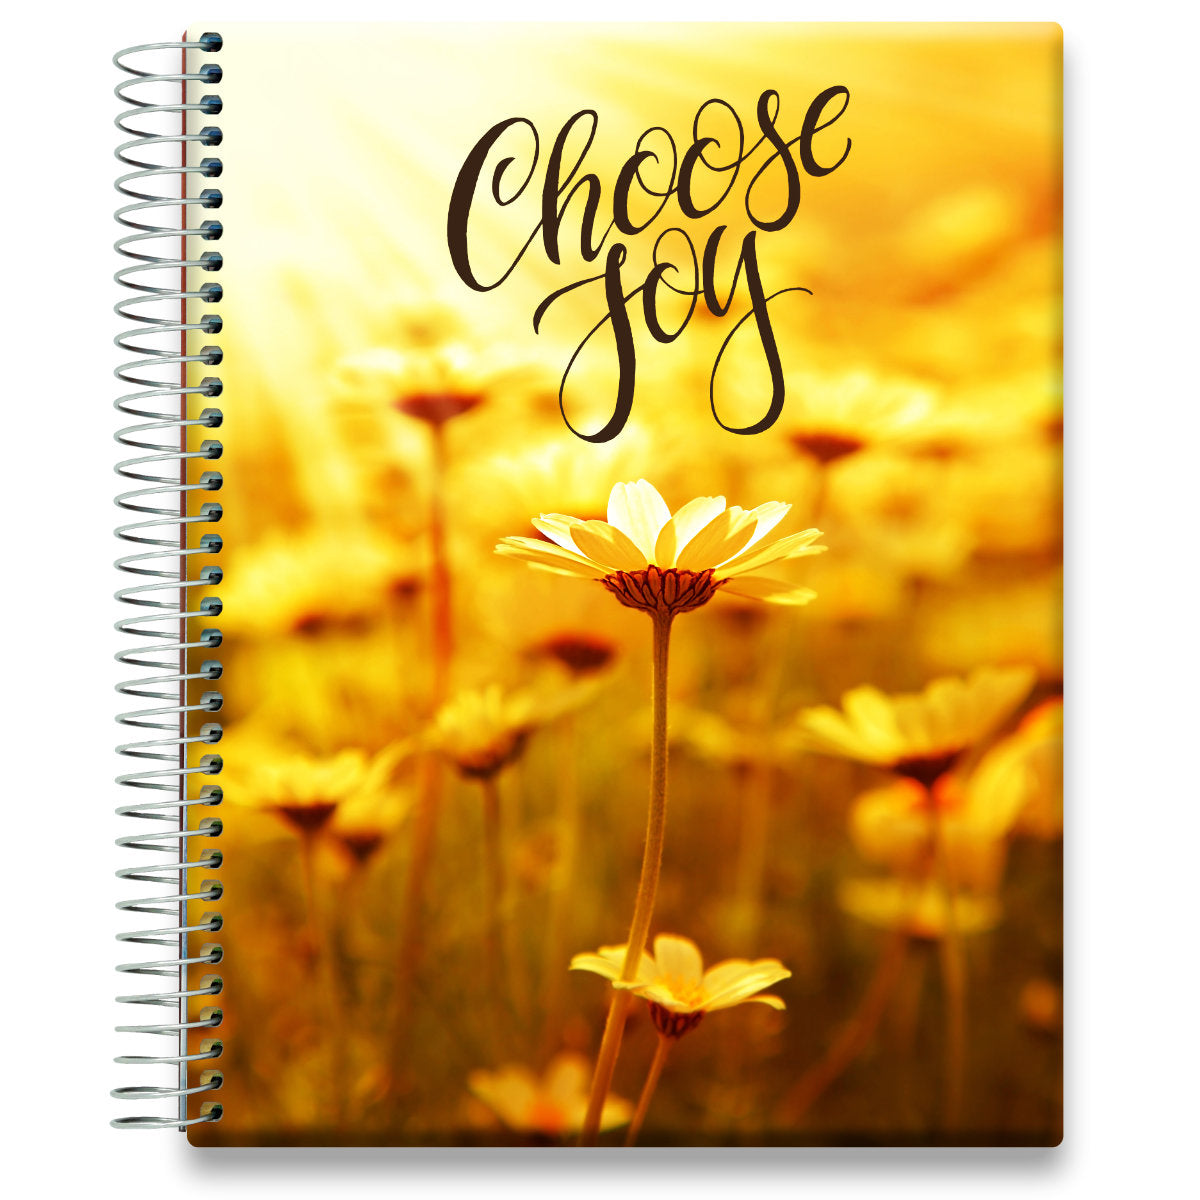 Coaching Session + Oct 2024 to Dec 2025 Planner - Choose Joy Daisies